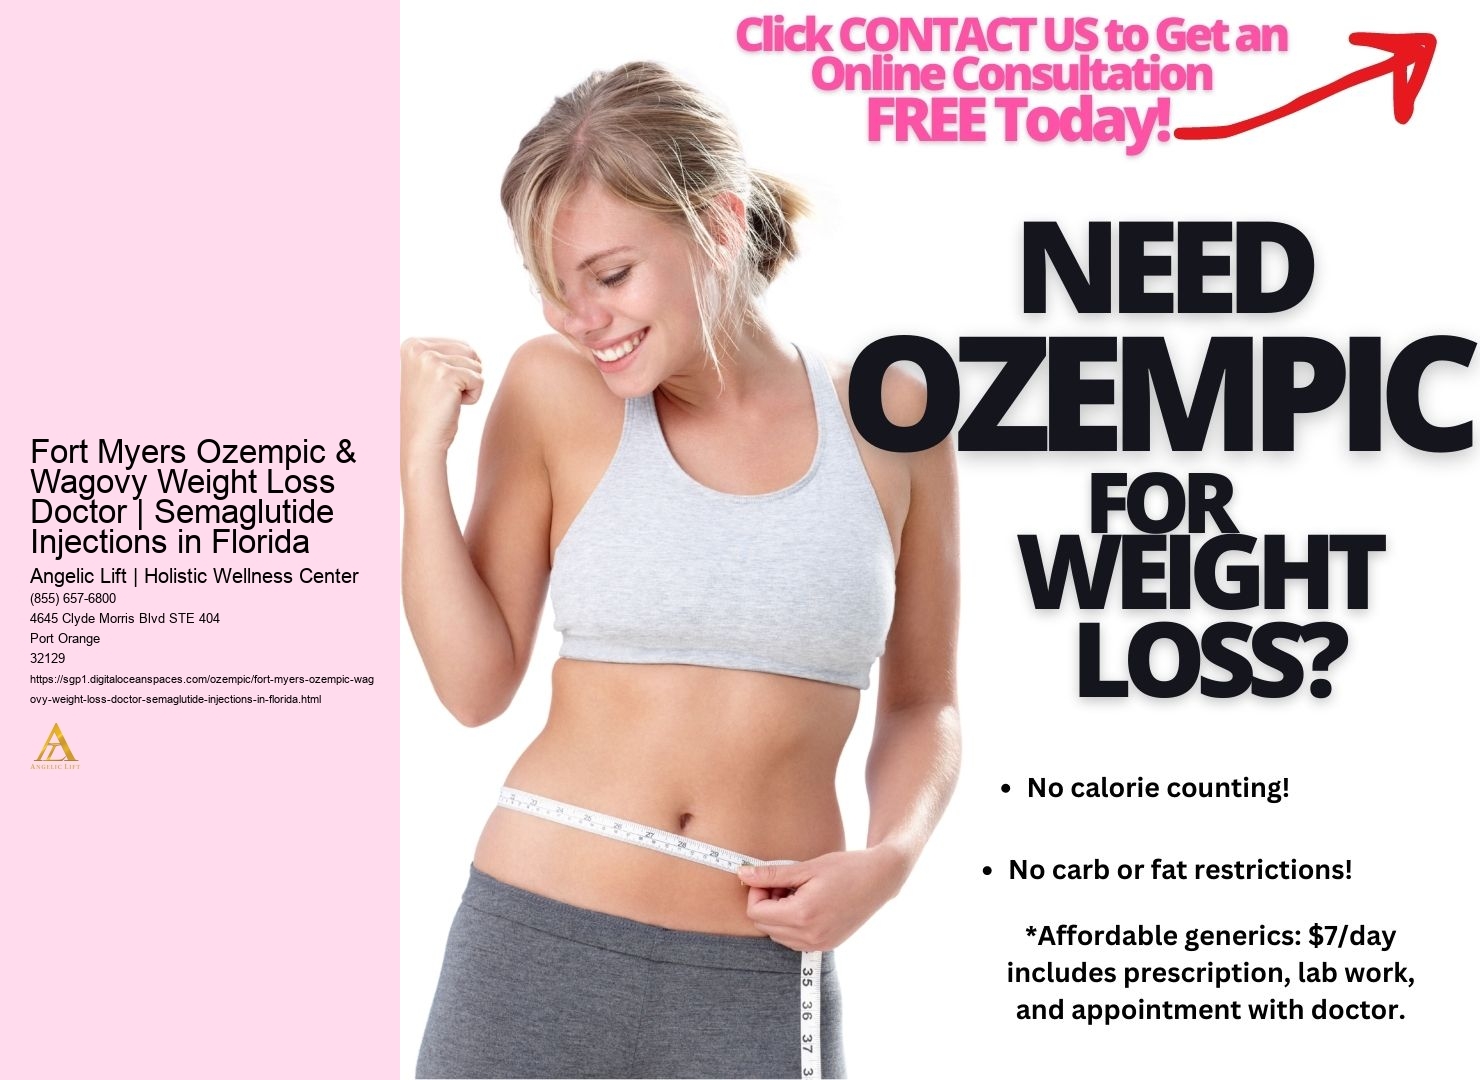 Fort Myers Ozempic & Wagovy Weight Loss Doctor | Semaglutide Injections in Florida